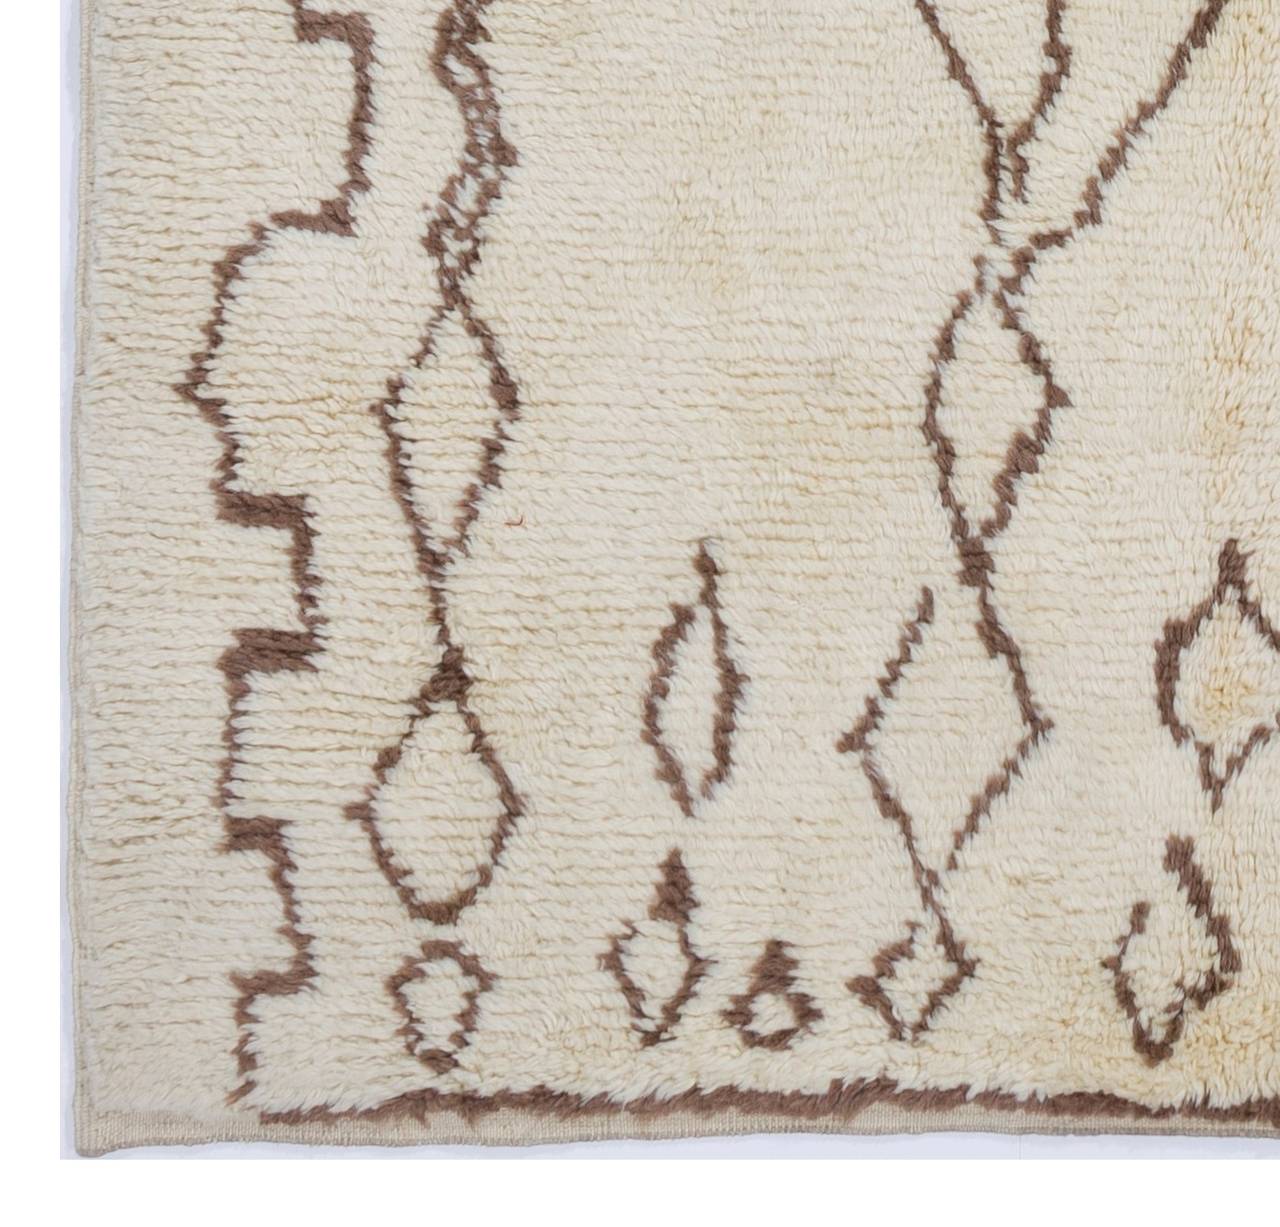 Modern Moroccan Beni Ourain Rug. 100% Natural Wool in Finest Quality. CUSTOM OPTIONS A. For Sale